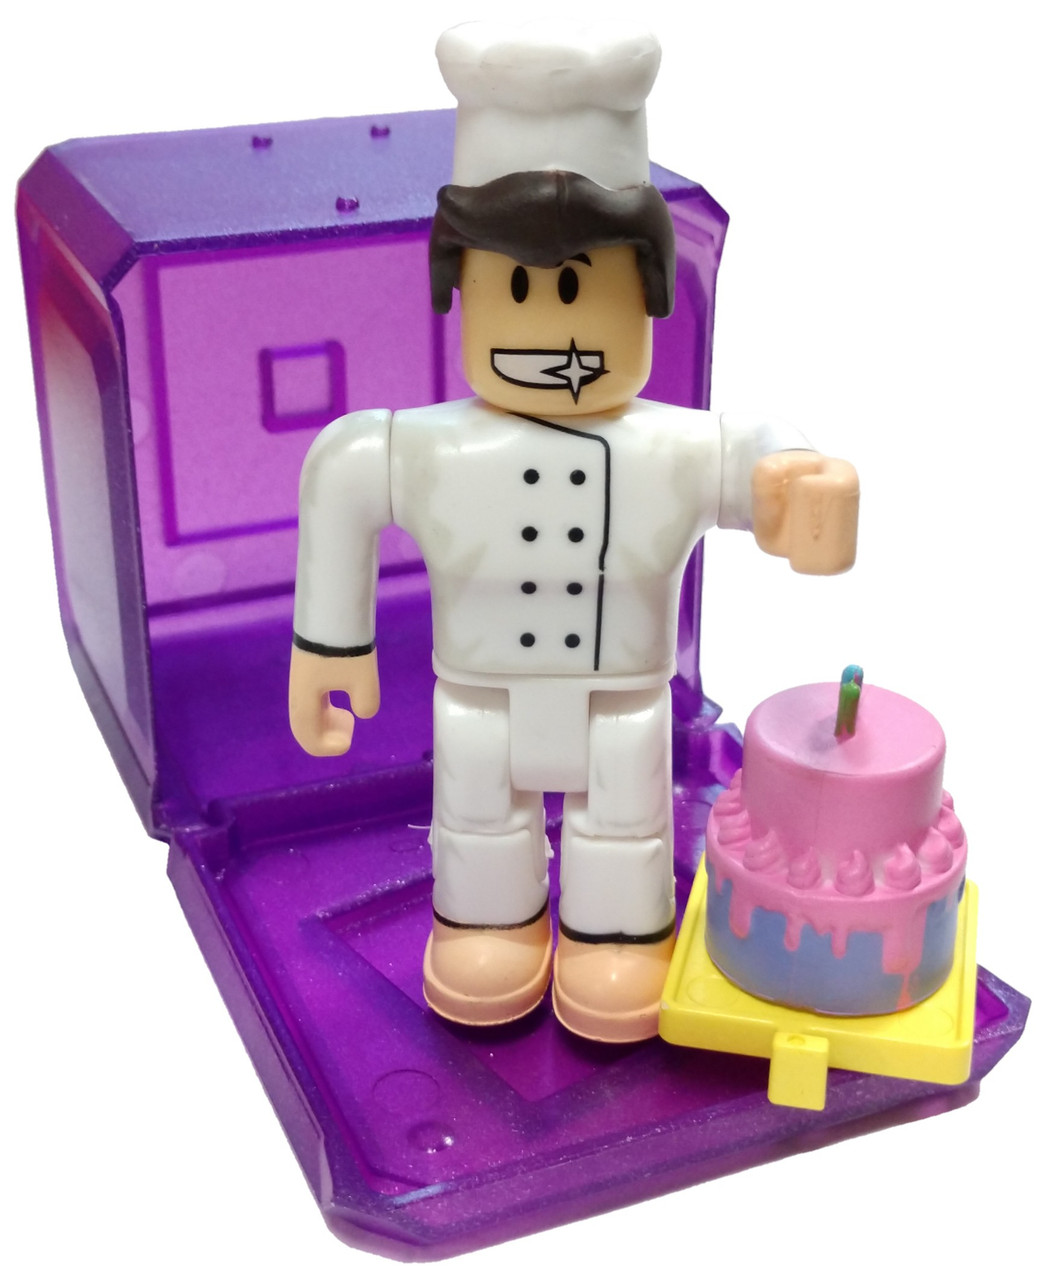 Roblox Celebrity Collection Series 3 Bakers Valley Cakemaster 3 Mini Figure With Cube And Online Code Loose Jazwares Toywiz - codes for castle siege roblox